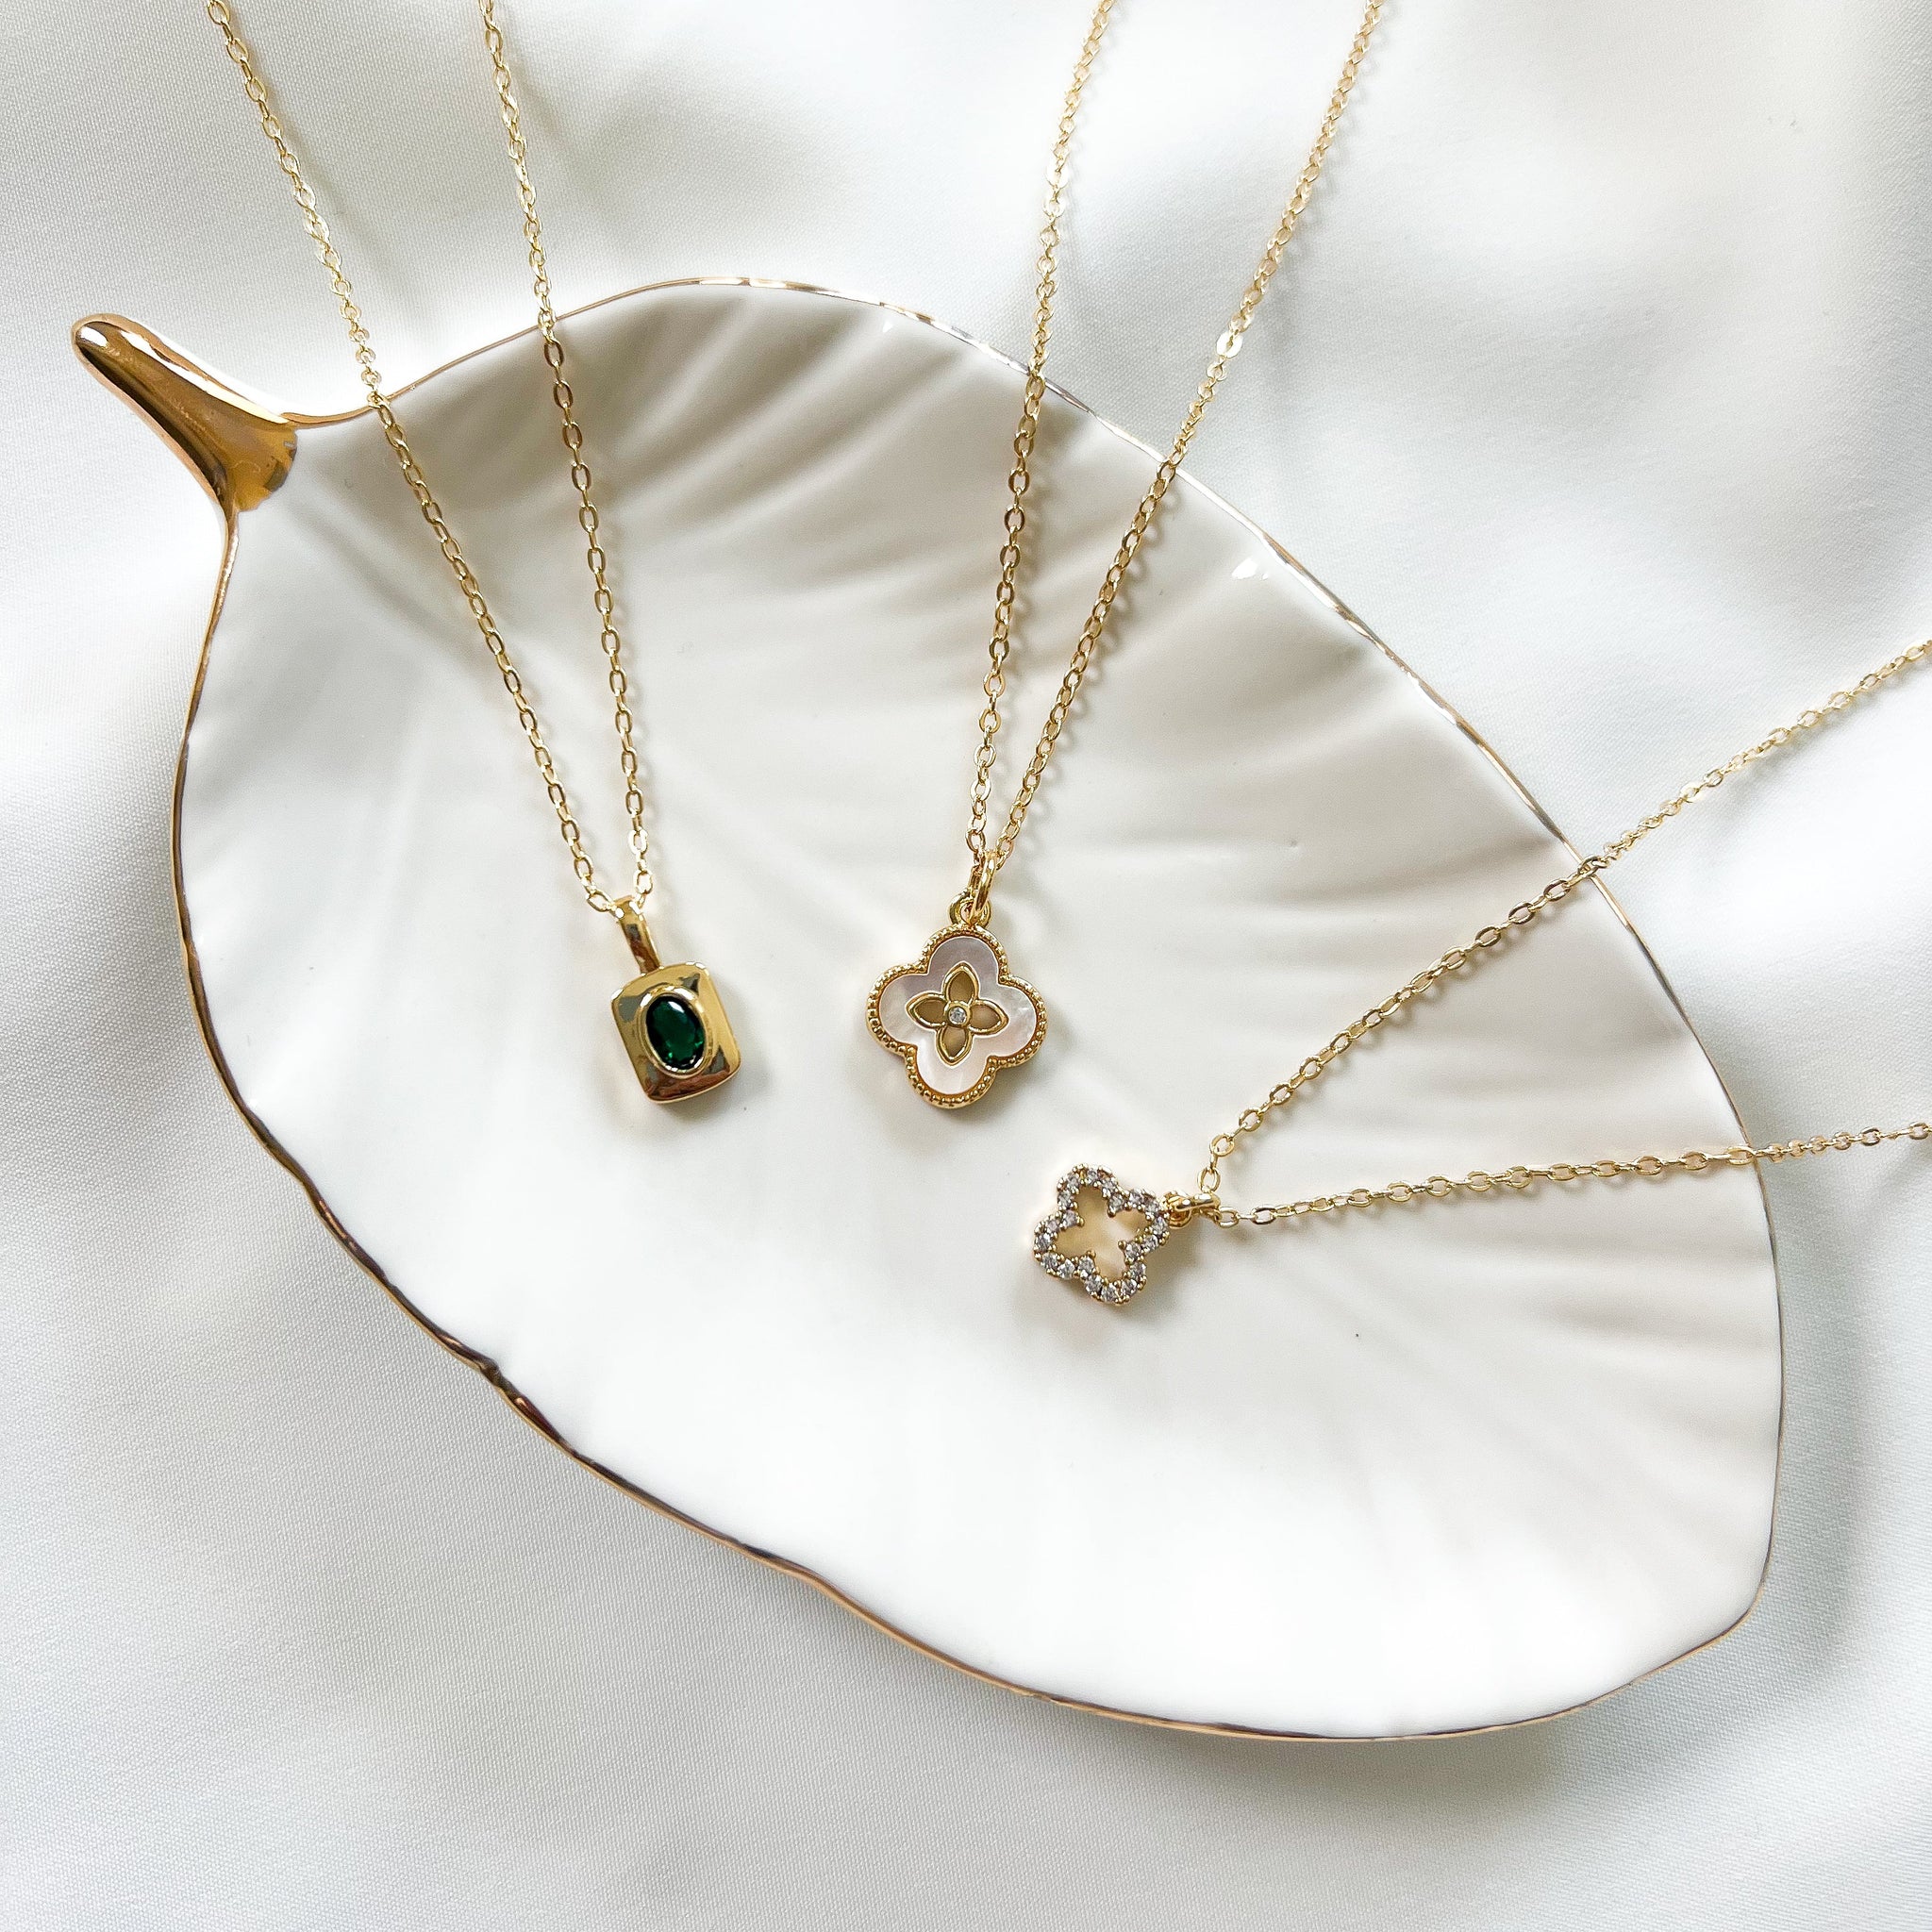 Emerald | Dainty Gold Necklace